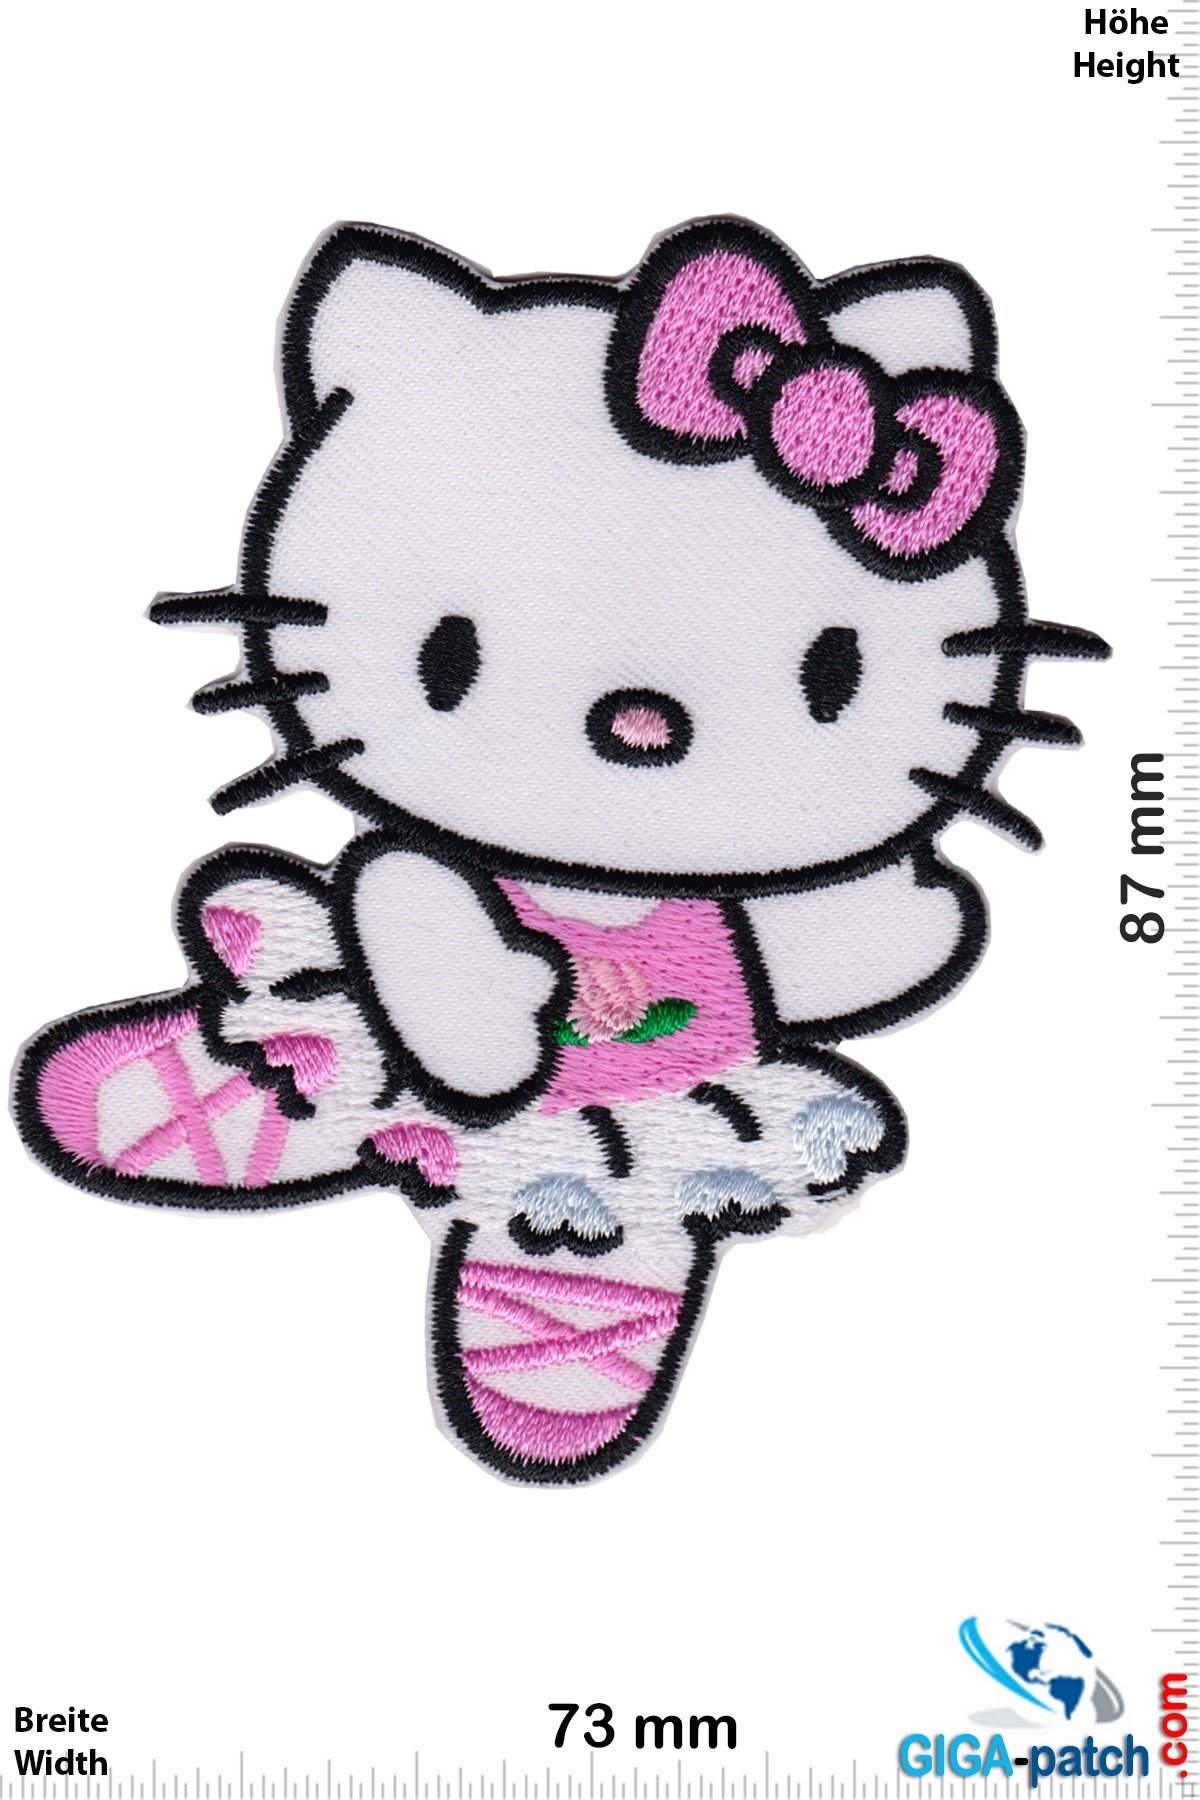 Hello Kitty Hello Kitty Ballerina- Patch - Back Patches" Patch Keychains Stickers - giga-patch.com Biggest Patch Shop worldwide